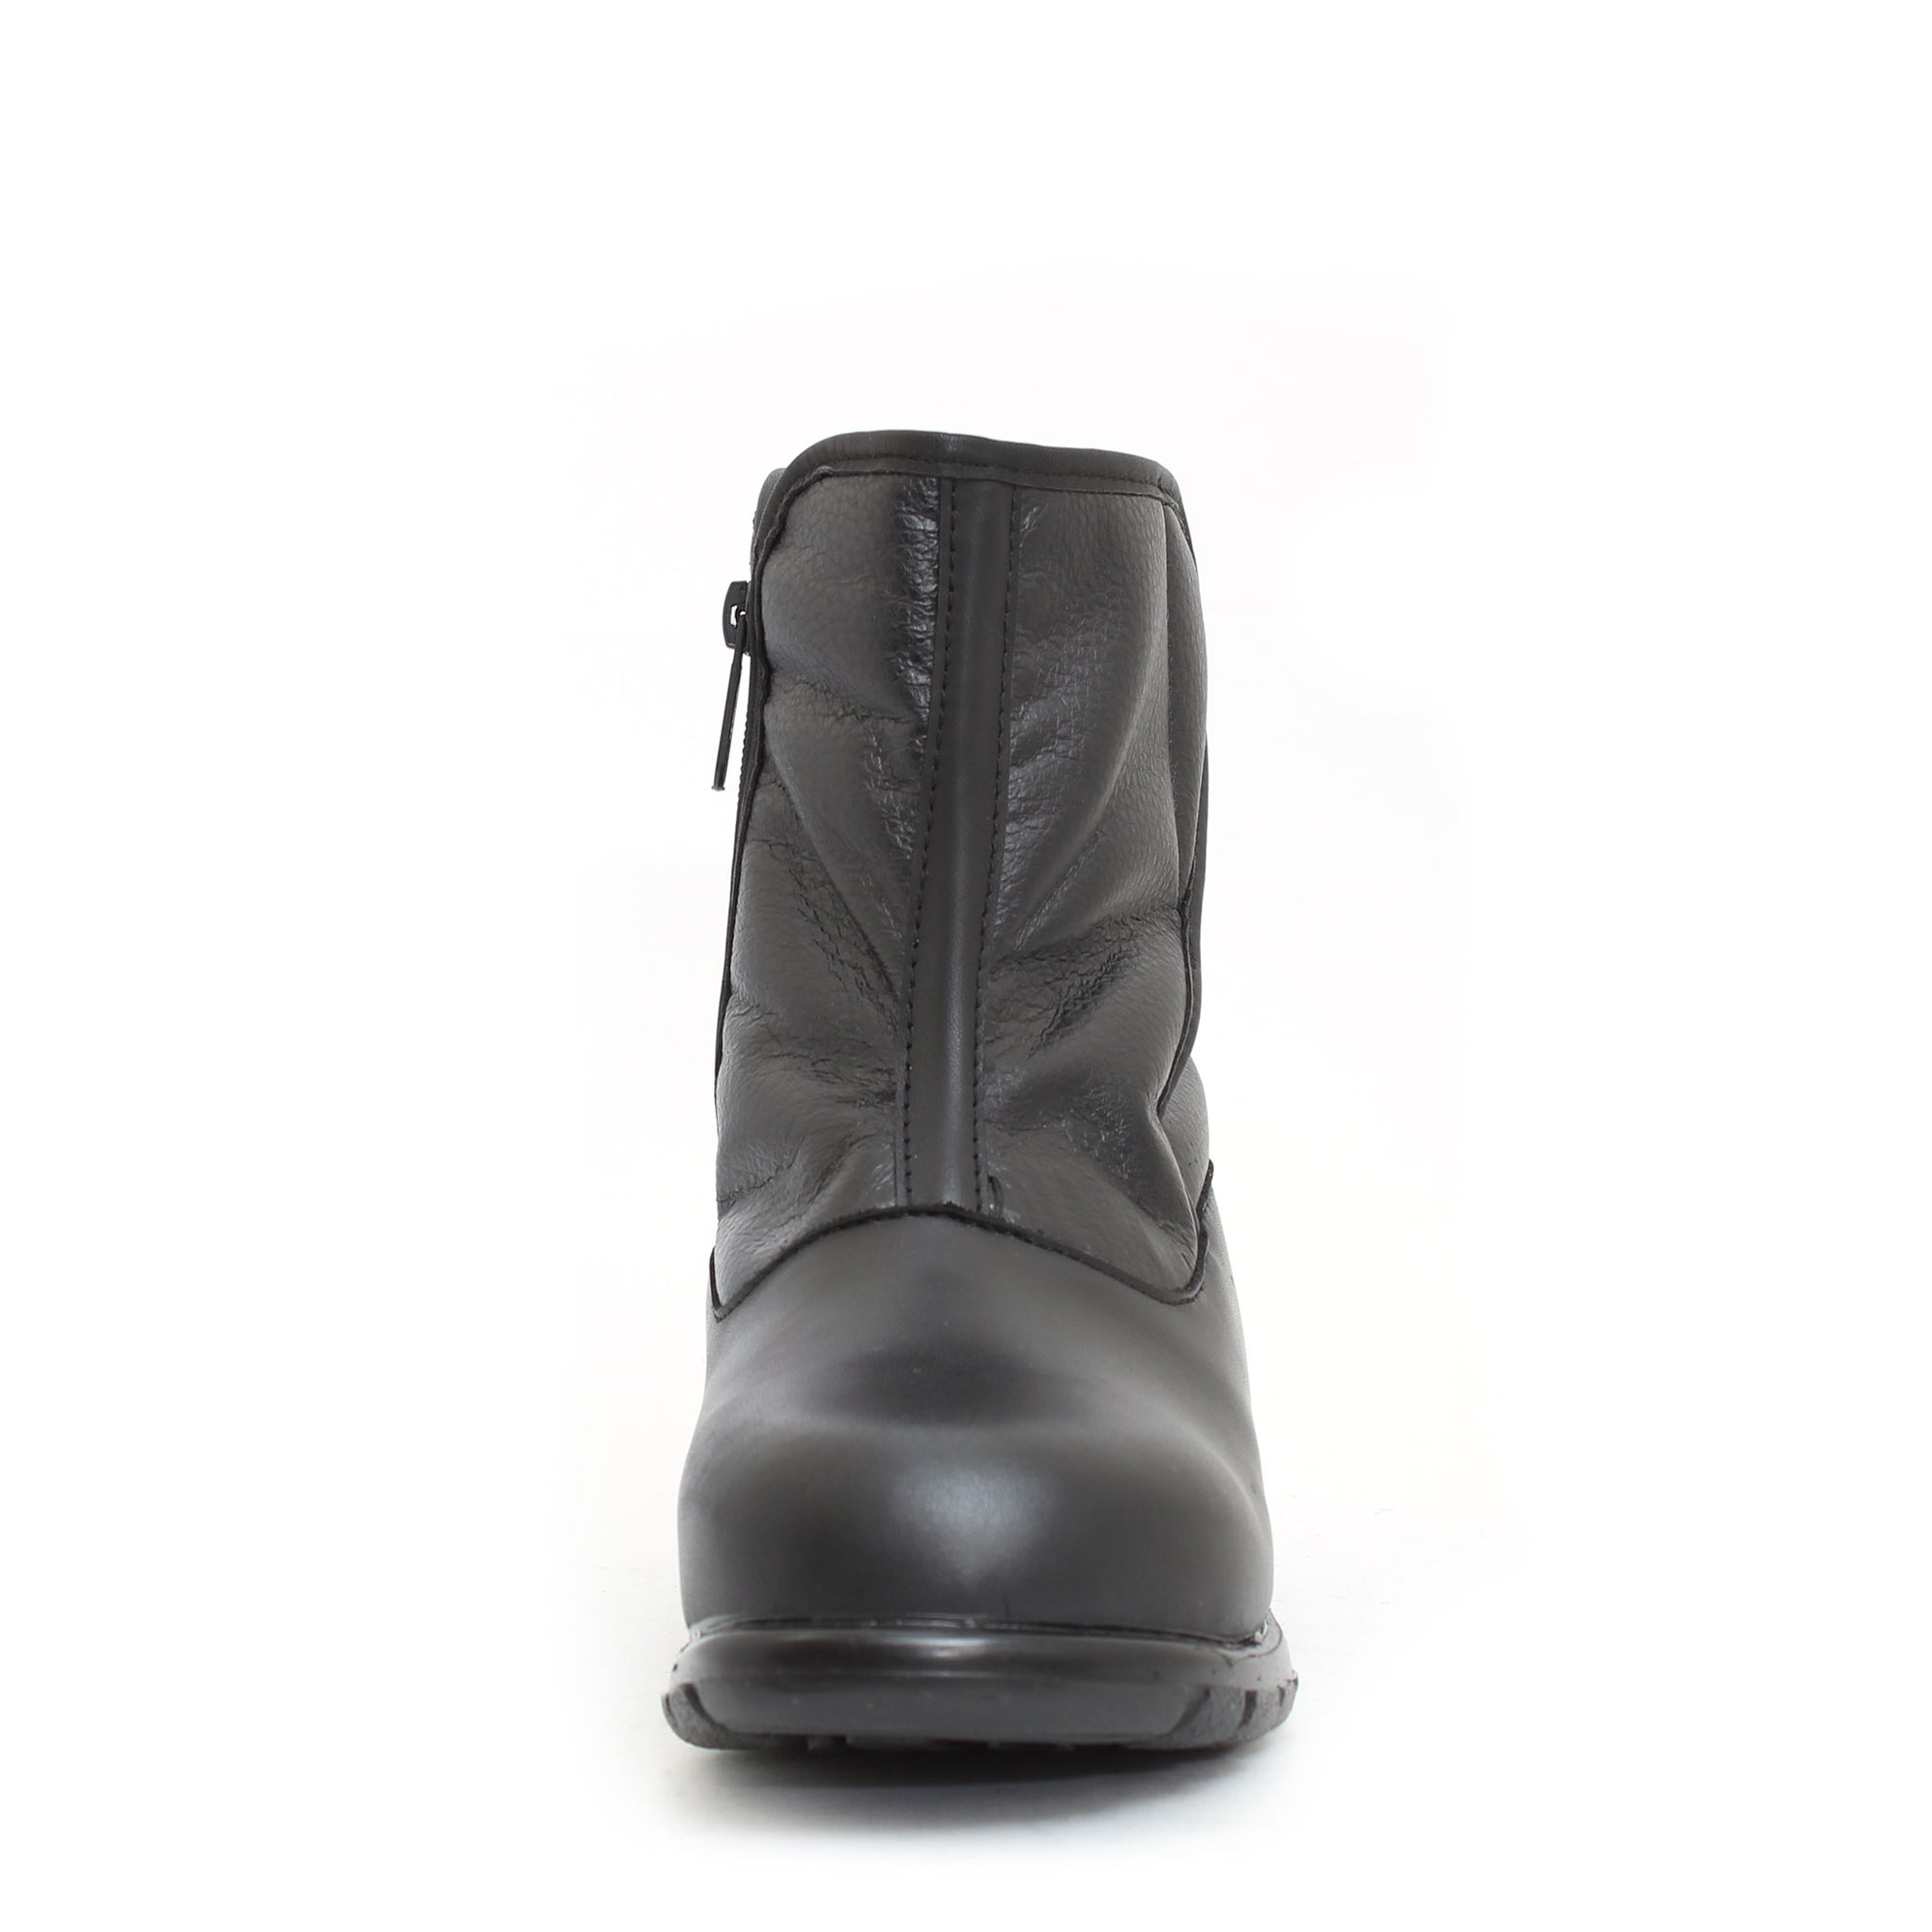 Claire winter boot for women - Black